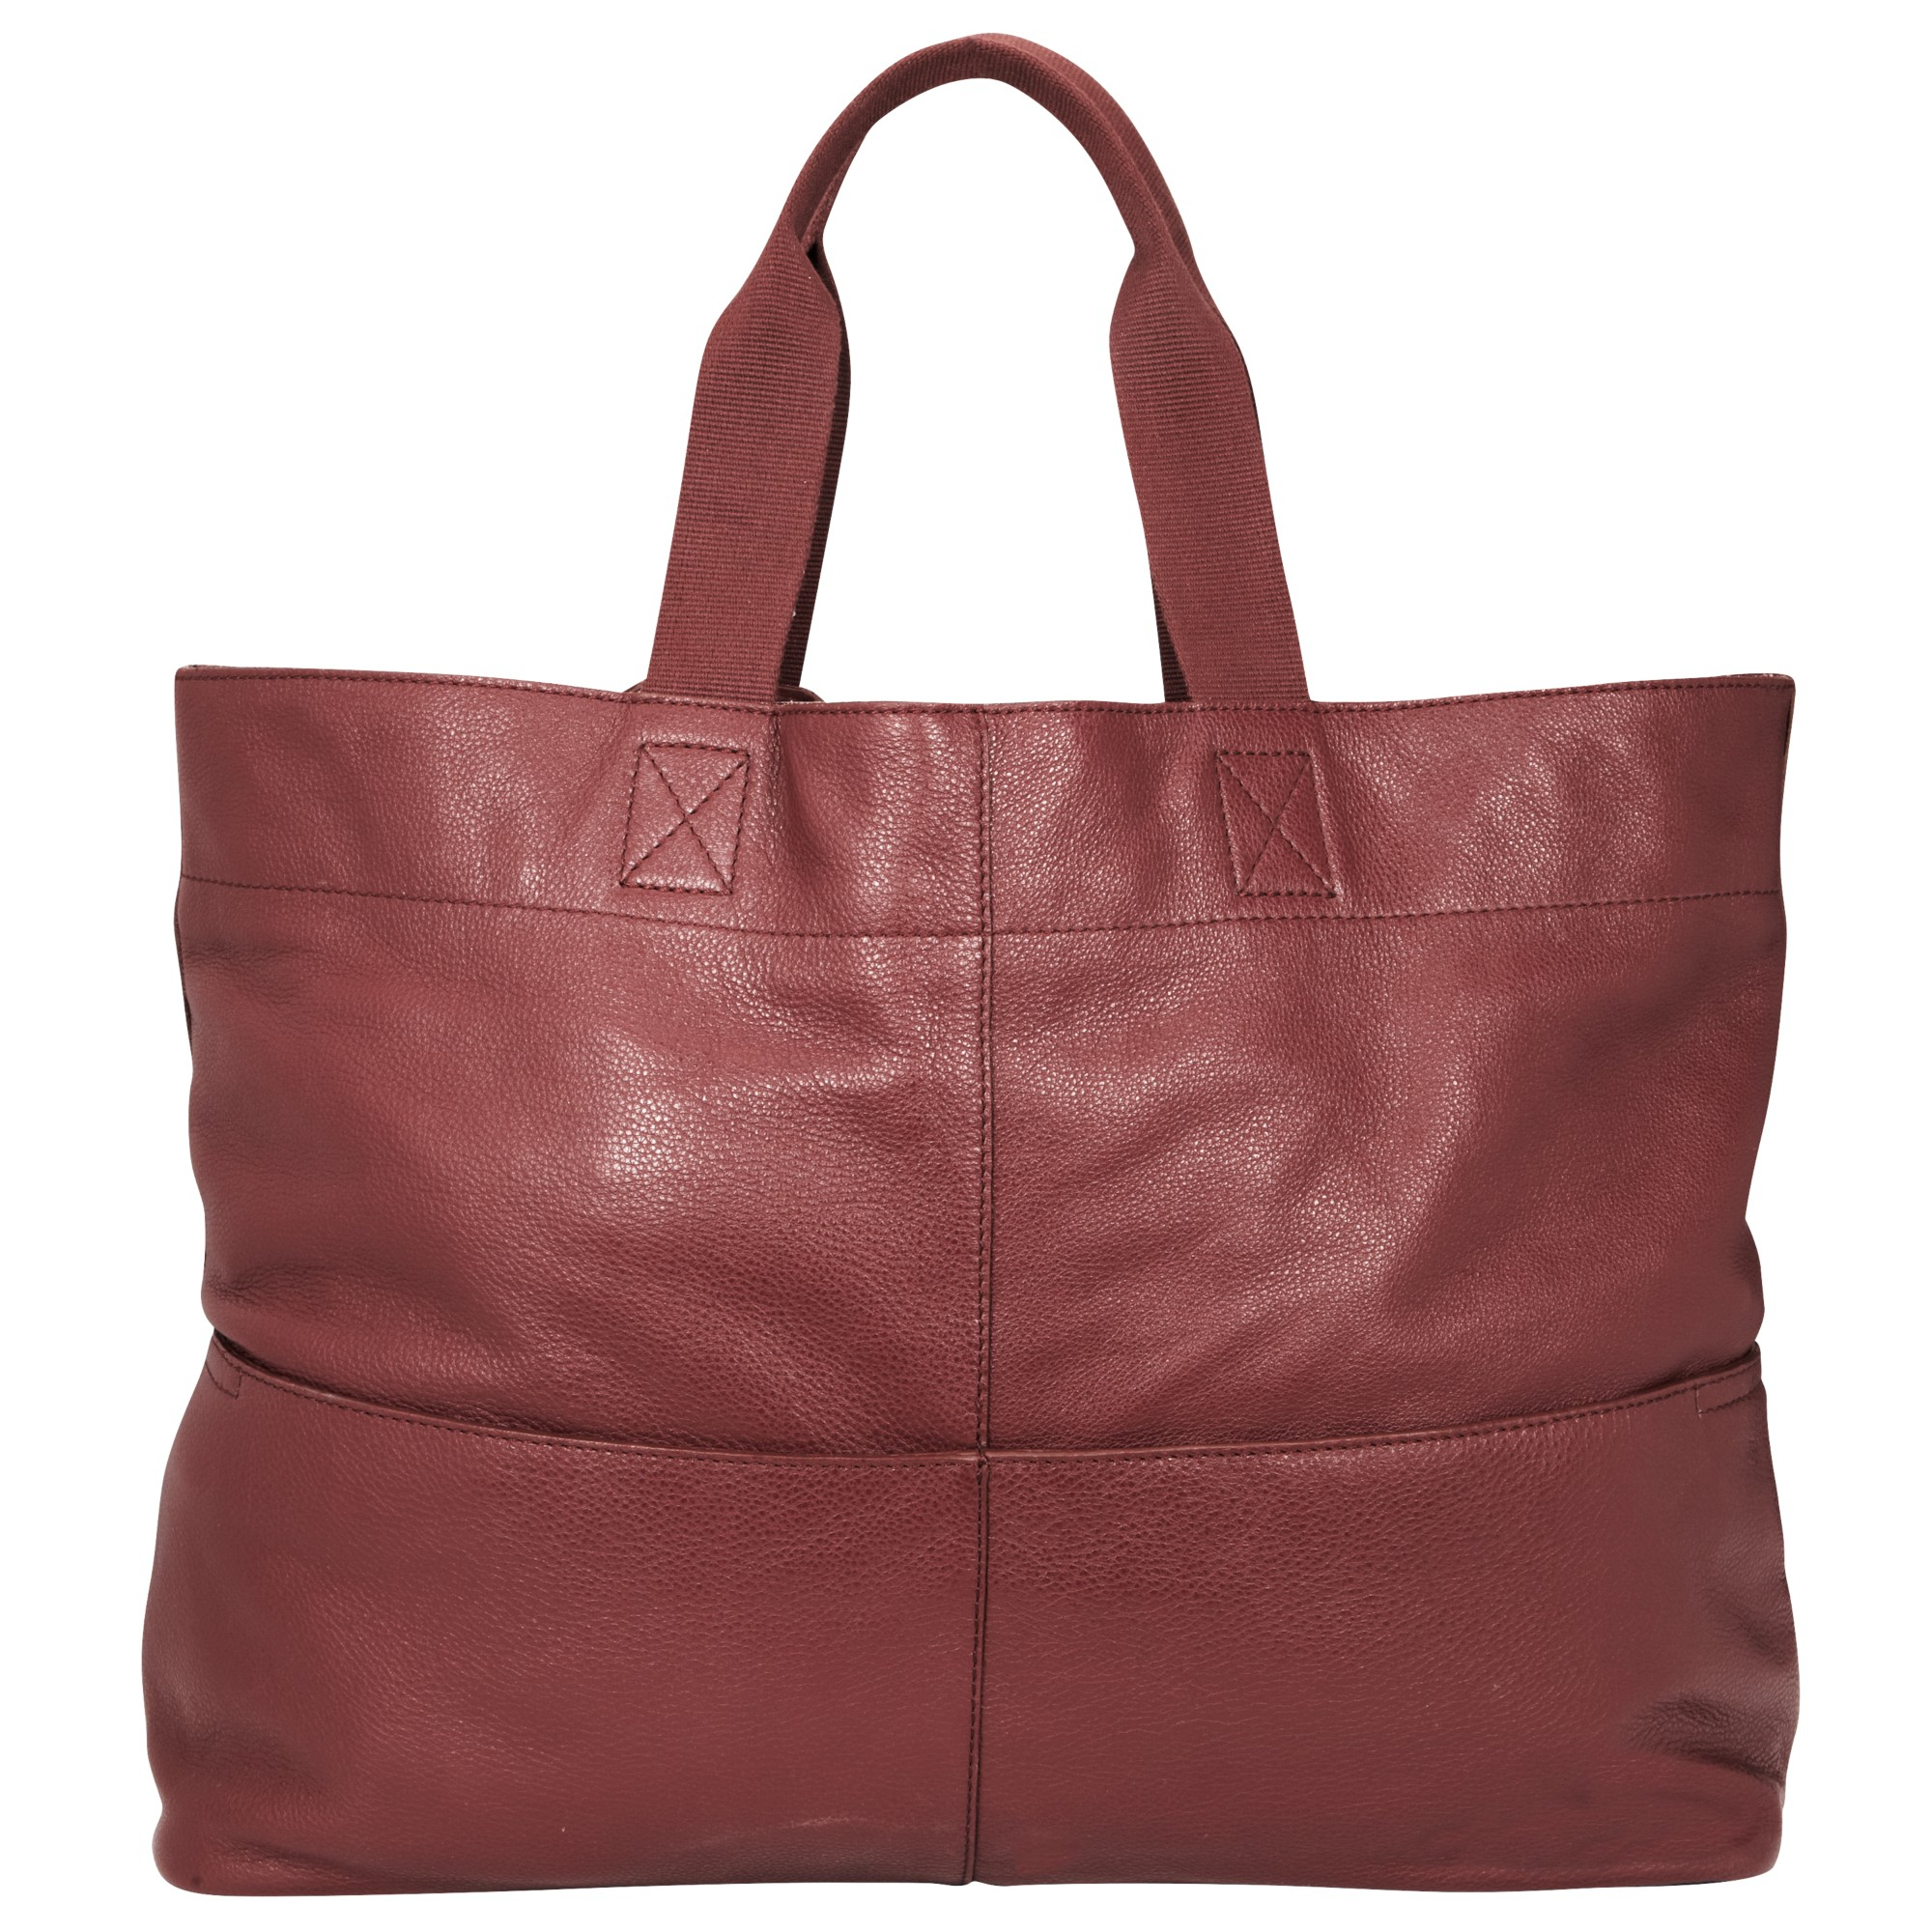 John Lewis Bronte Oversized Leather Tote Bag in Purple (oxblood) | Lyst